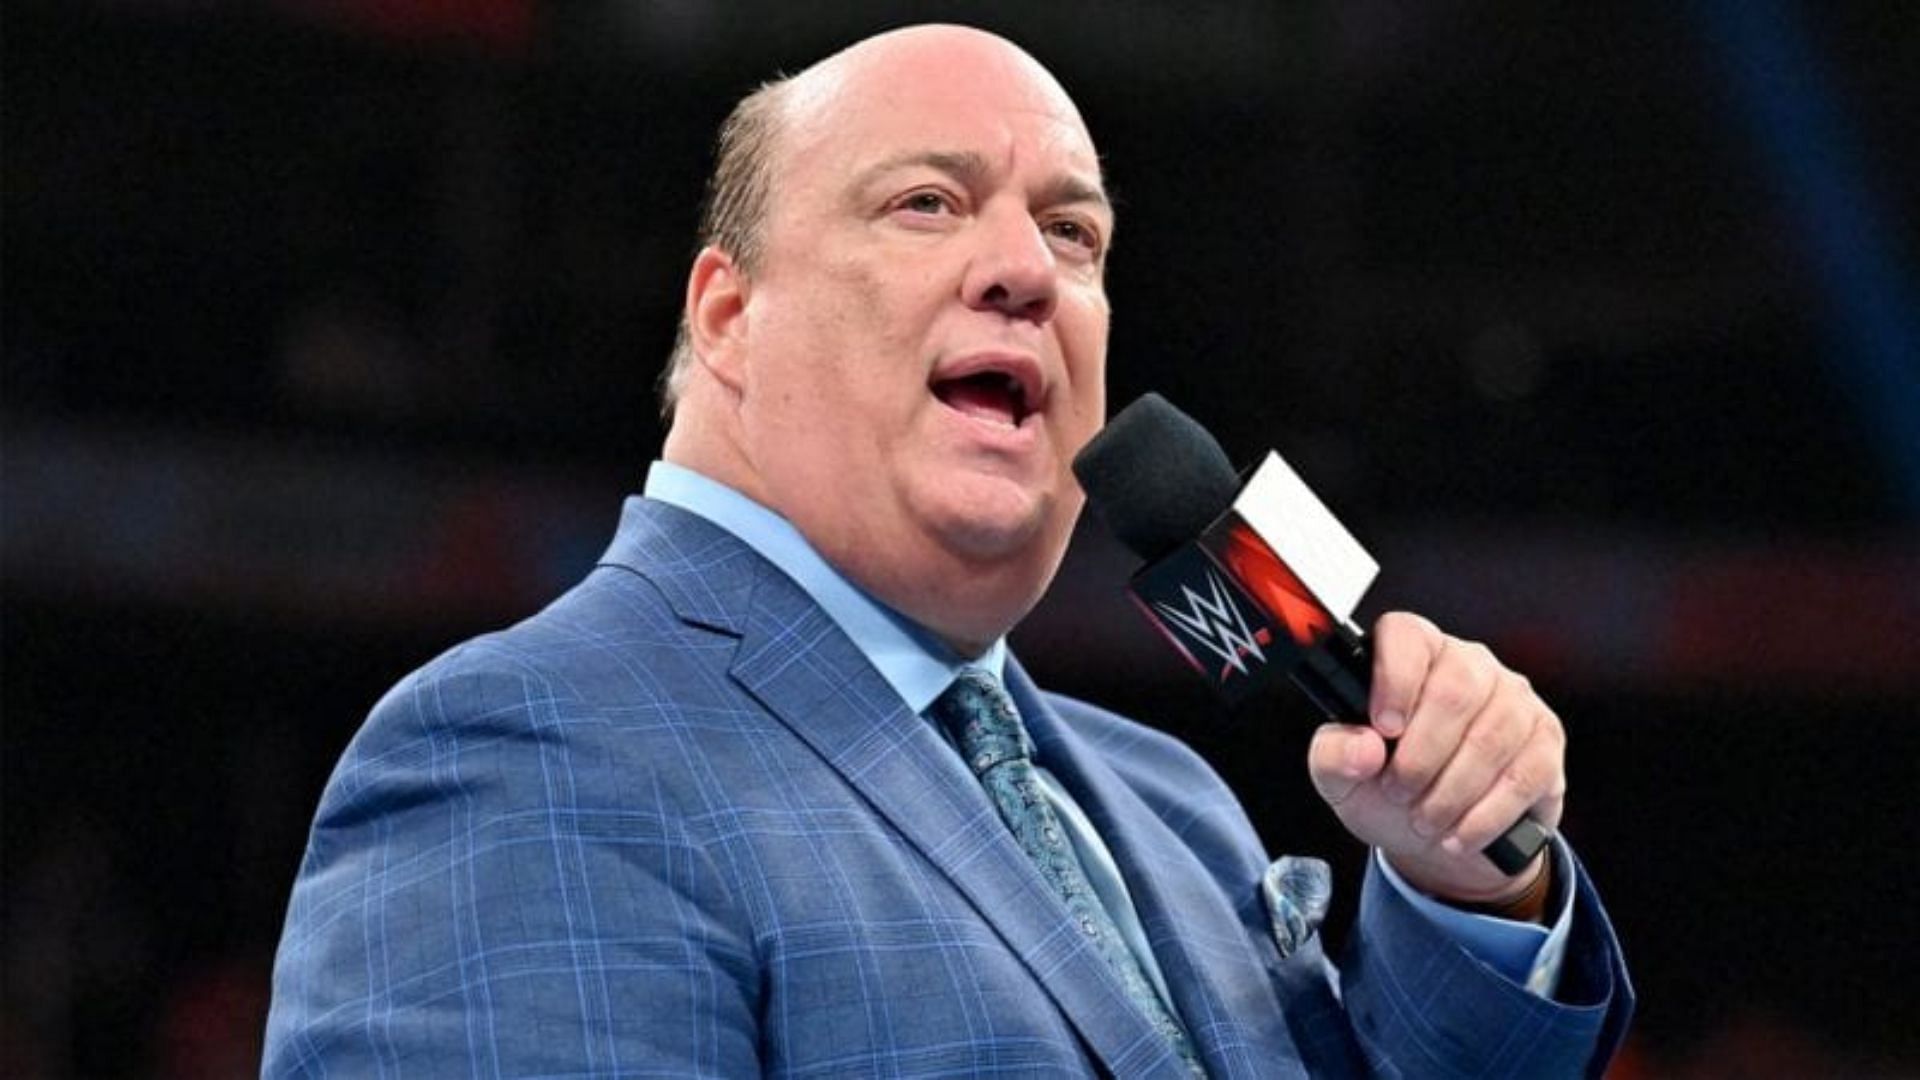 Paul Heyman has been speaking on how he cuts his WWE promos.